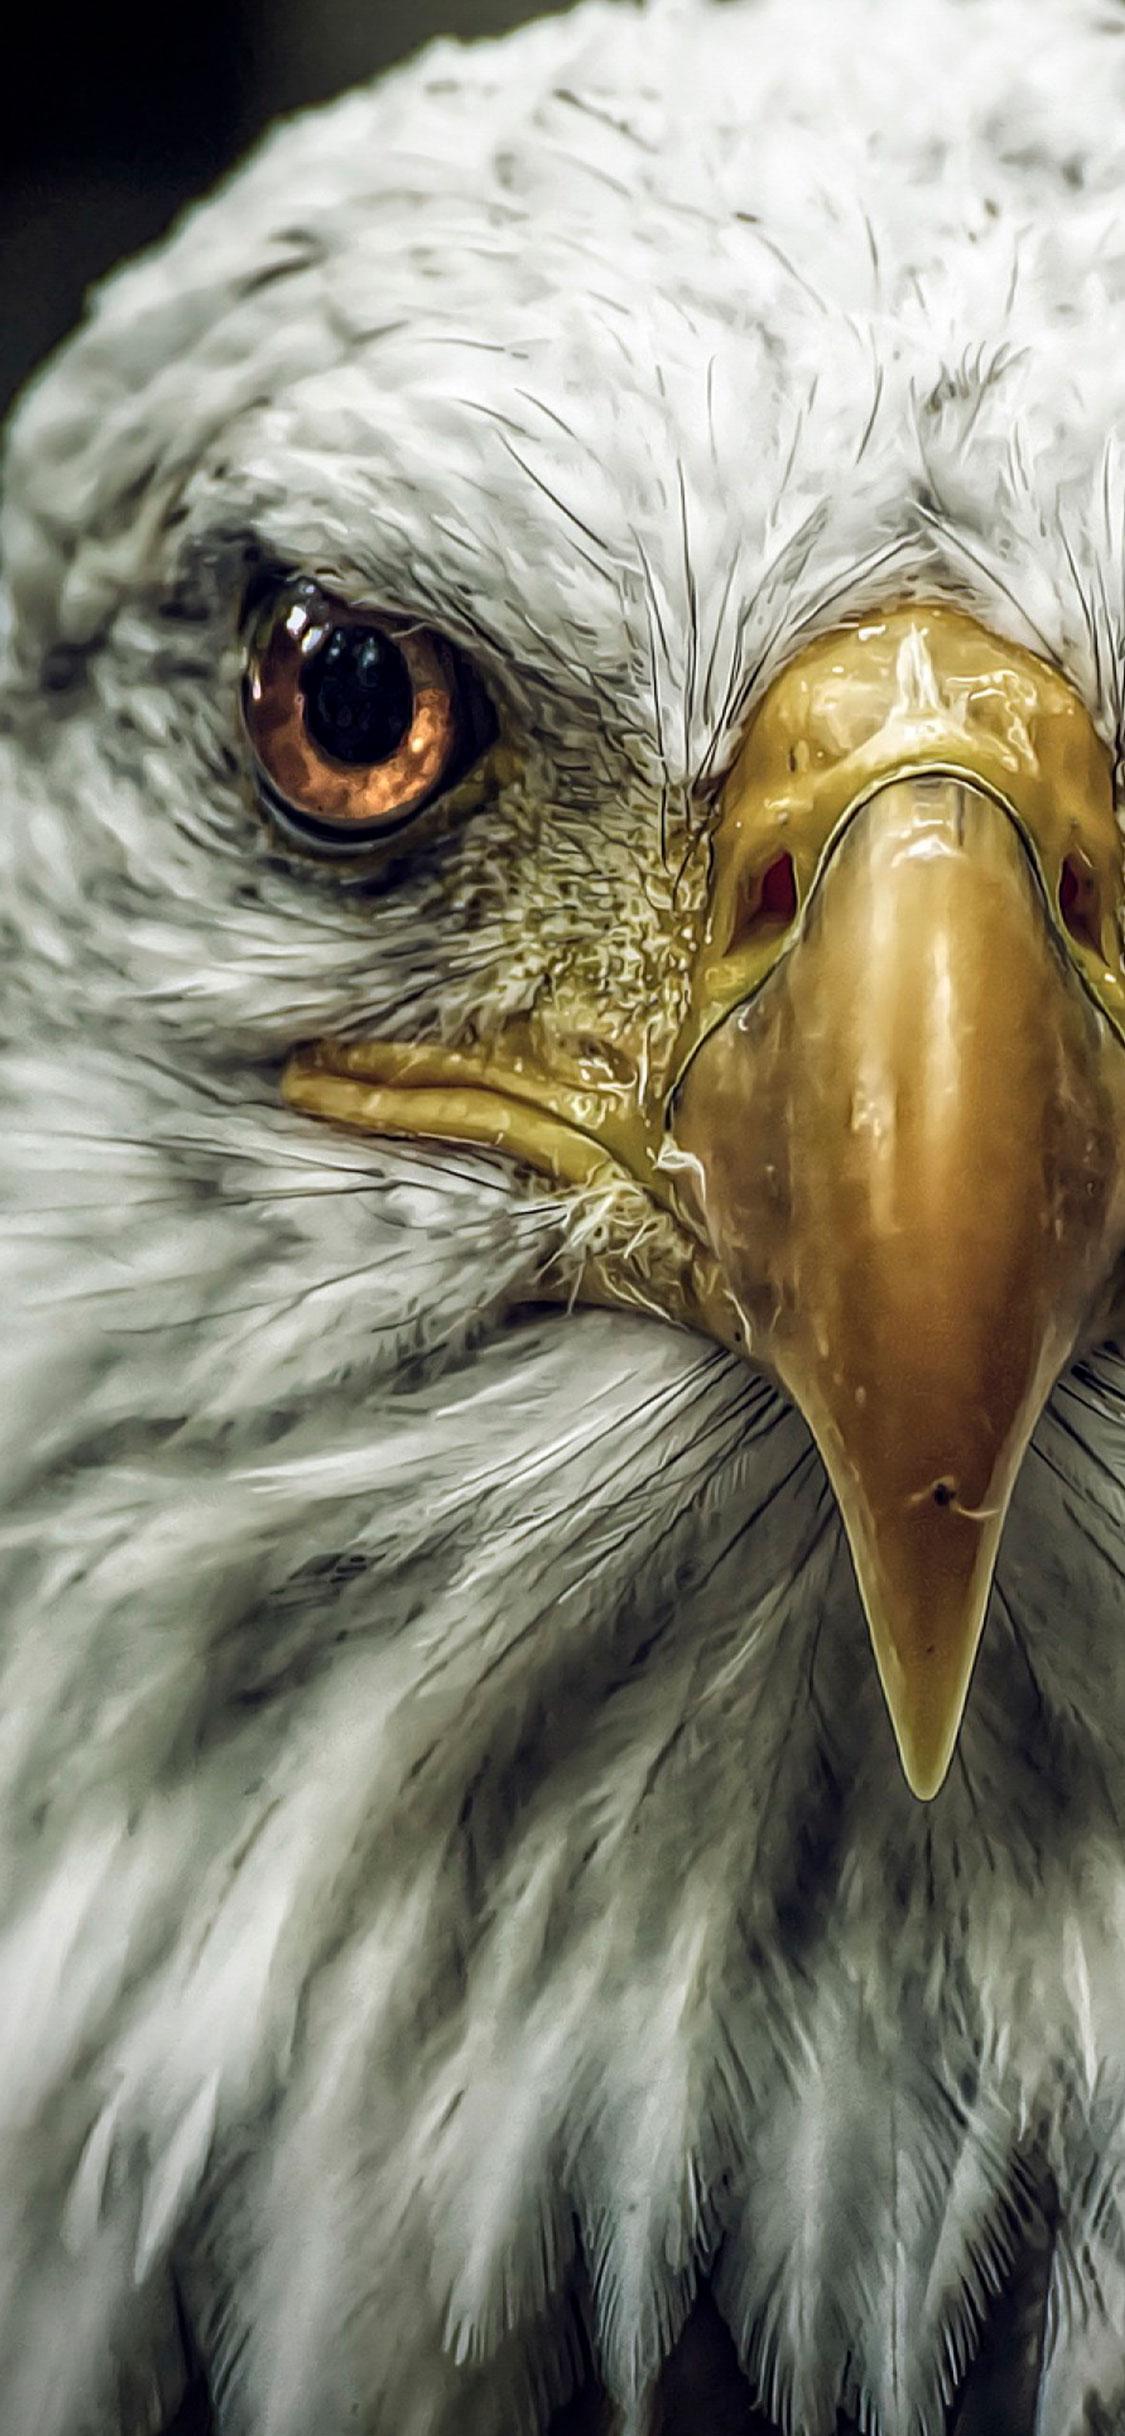 Eagle Wallpaper for iPhone X, 6